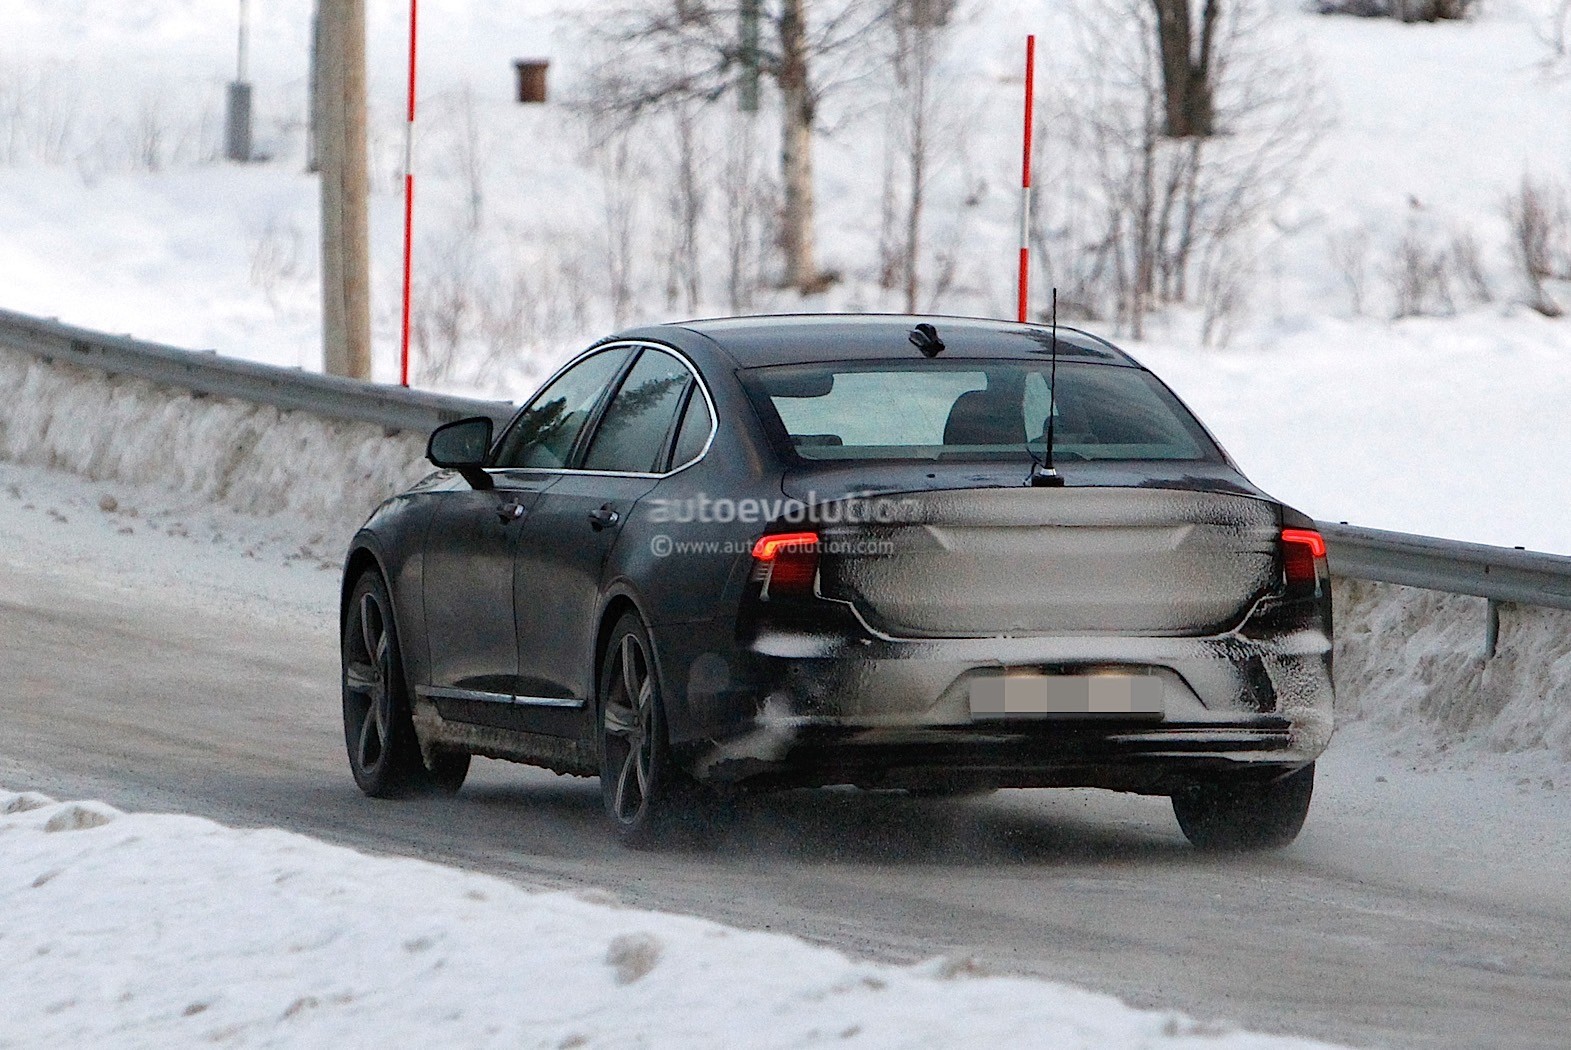 https://s1.cdn.autoevolution.com/images/news/gallery/2021-volvo-s90-and-v90-facelift-wear-useless-camouflage-winter-testing_17.jpg